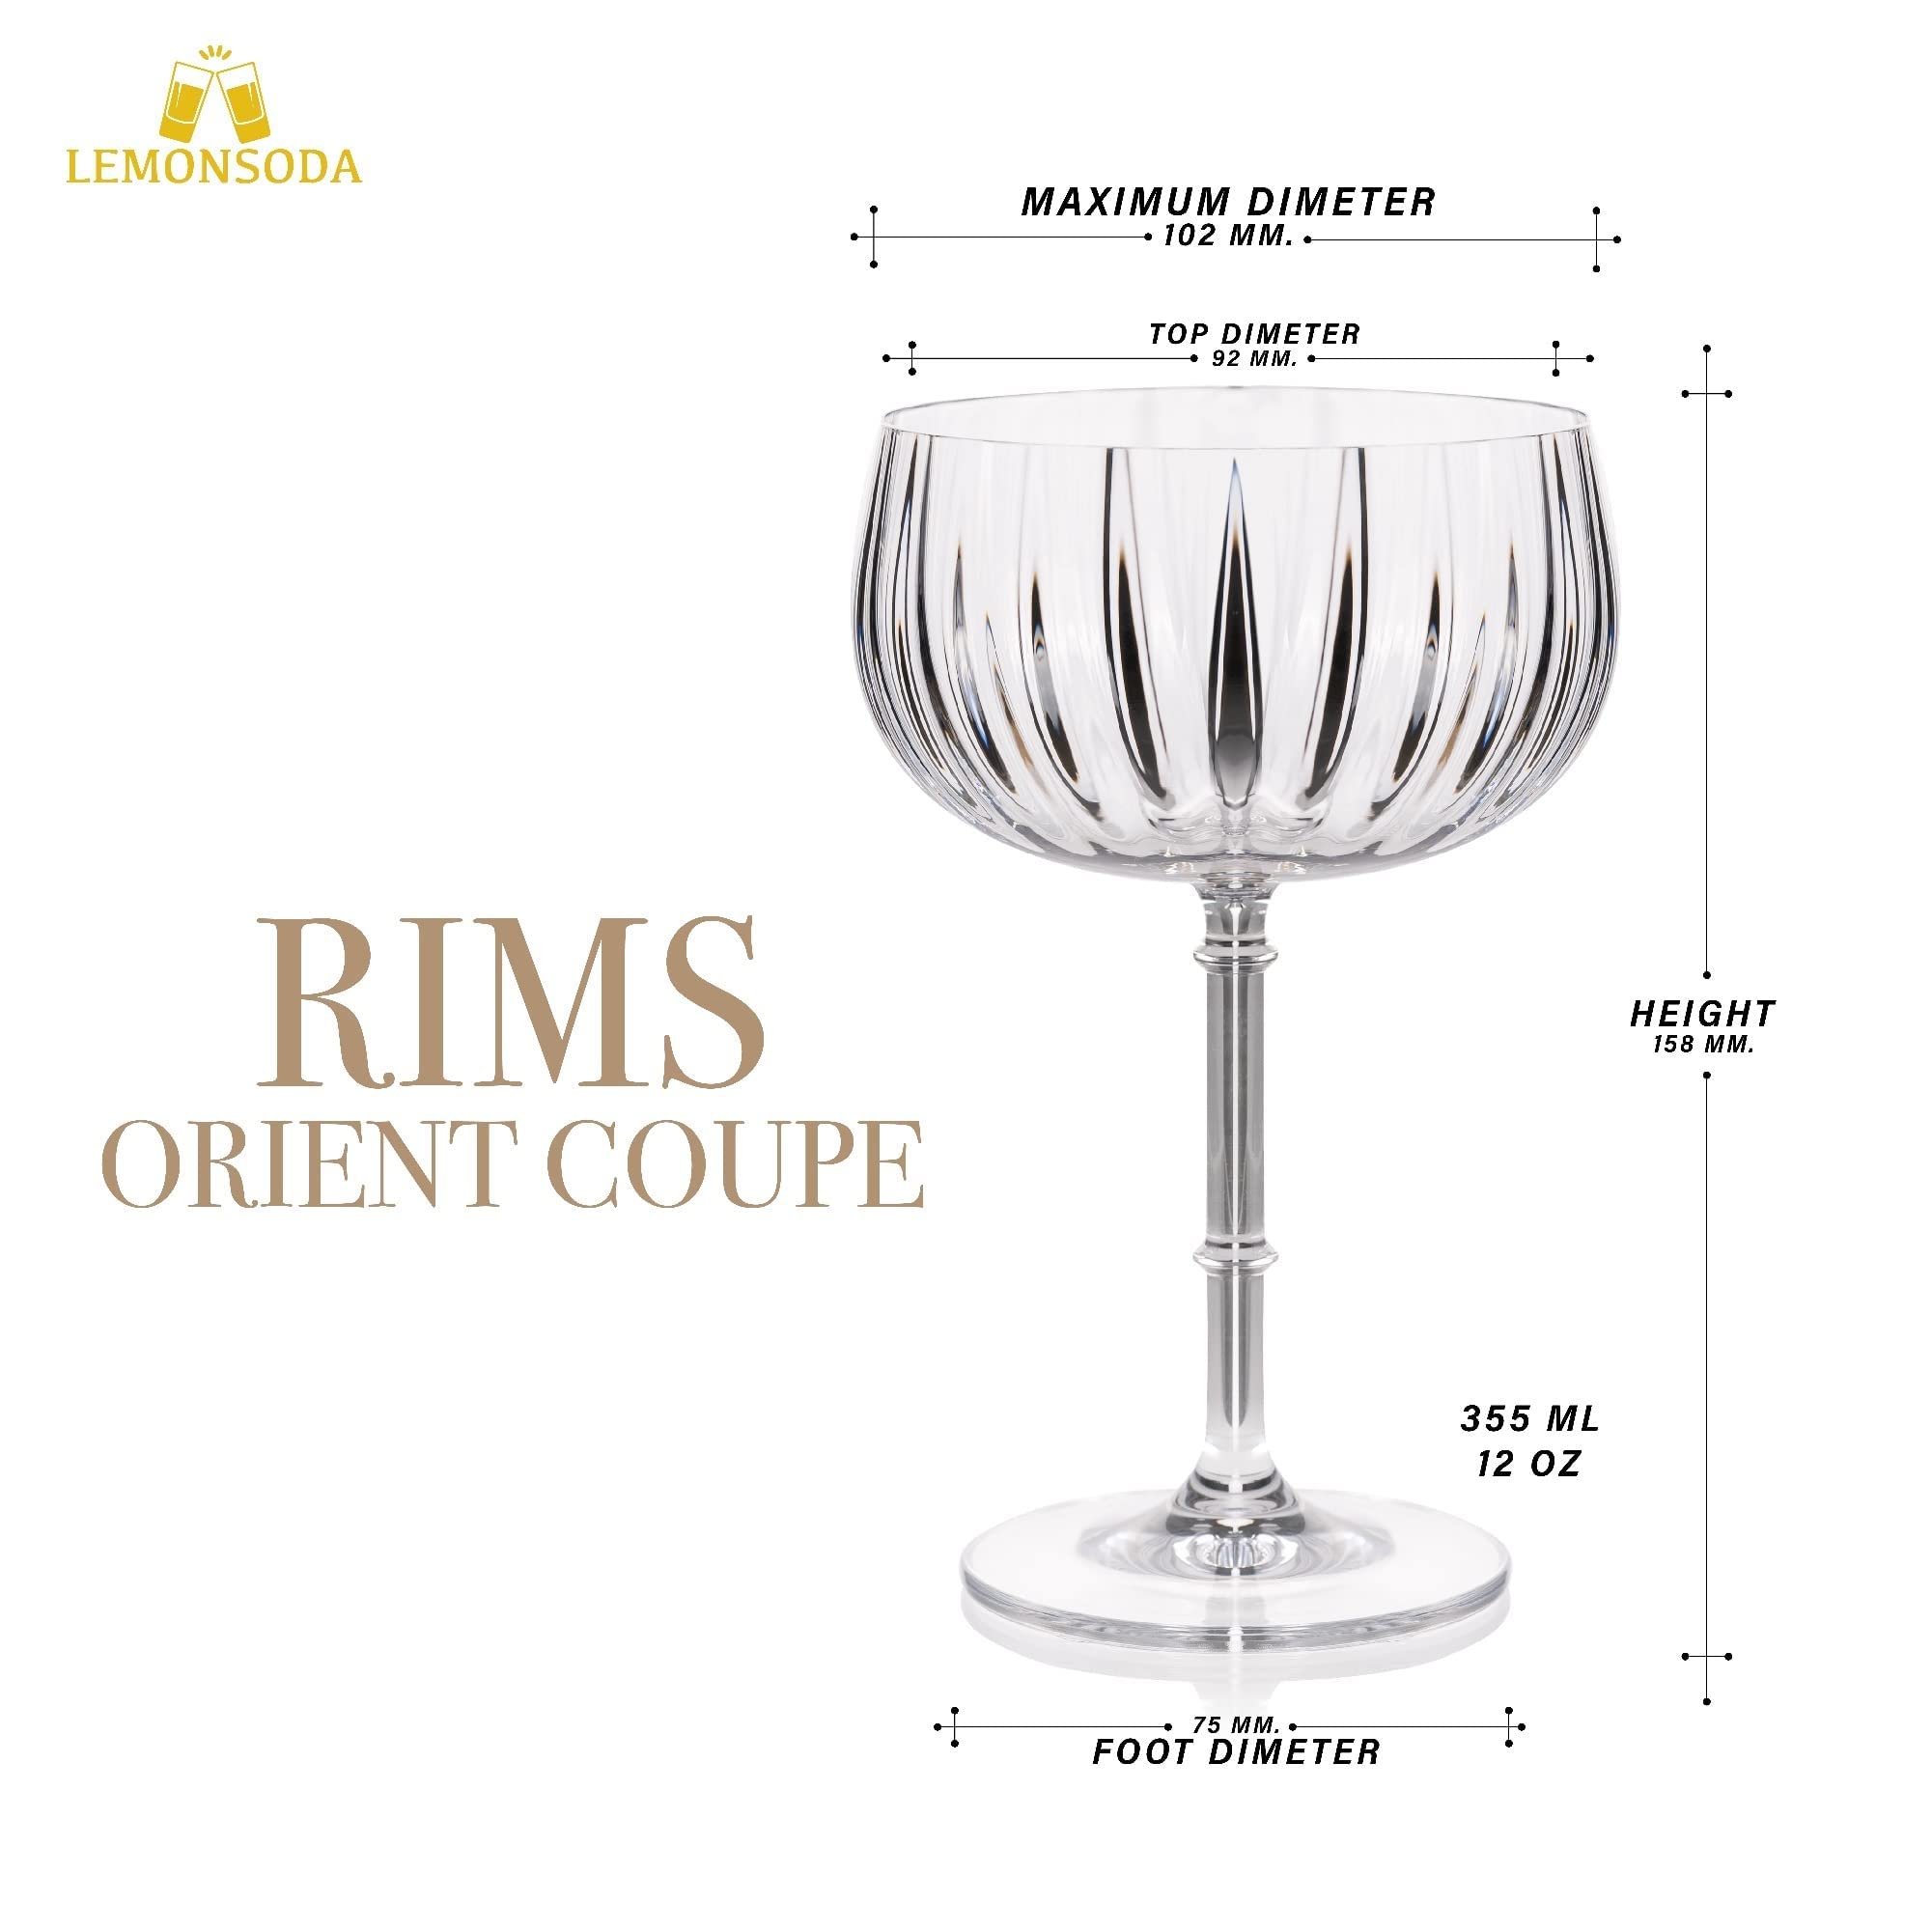 LEMONSODA Rims Orient-Coupe Cocktail Glasses - Quality Crystal Glass - Lead-free, Crystal Clear, Elegant Design, Luxury Cocktail Glass - Extra Durable - Set of 2 (Coupe)